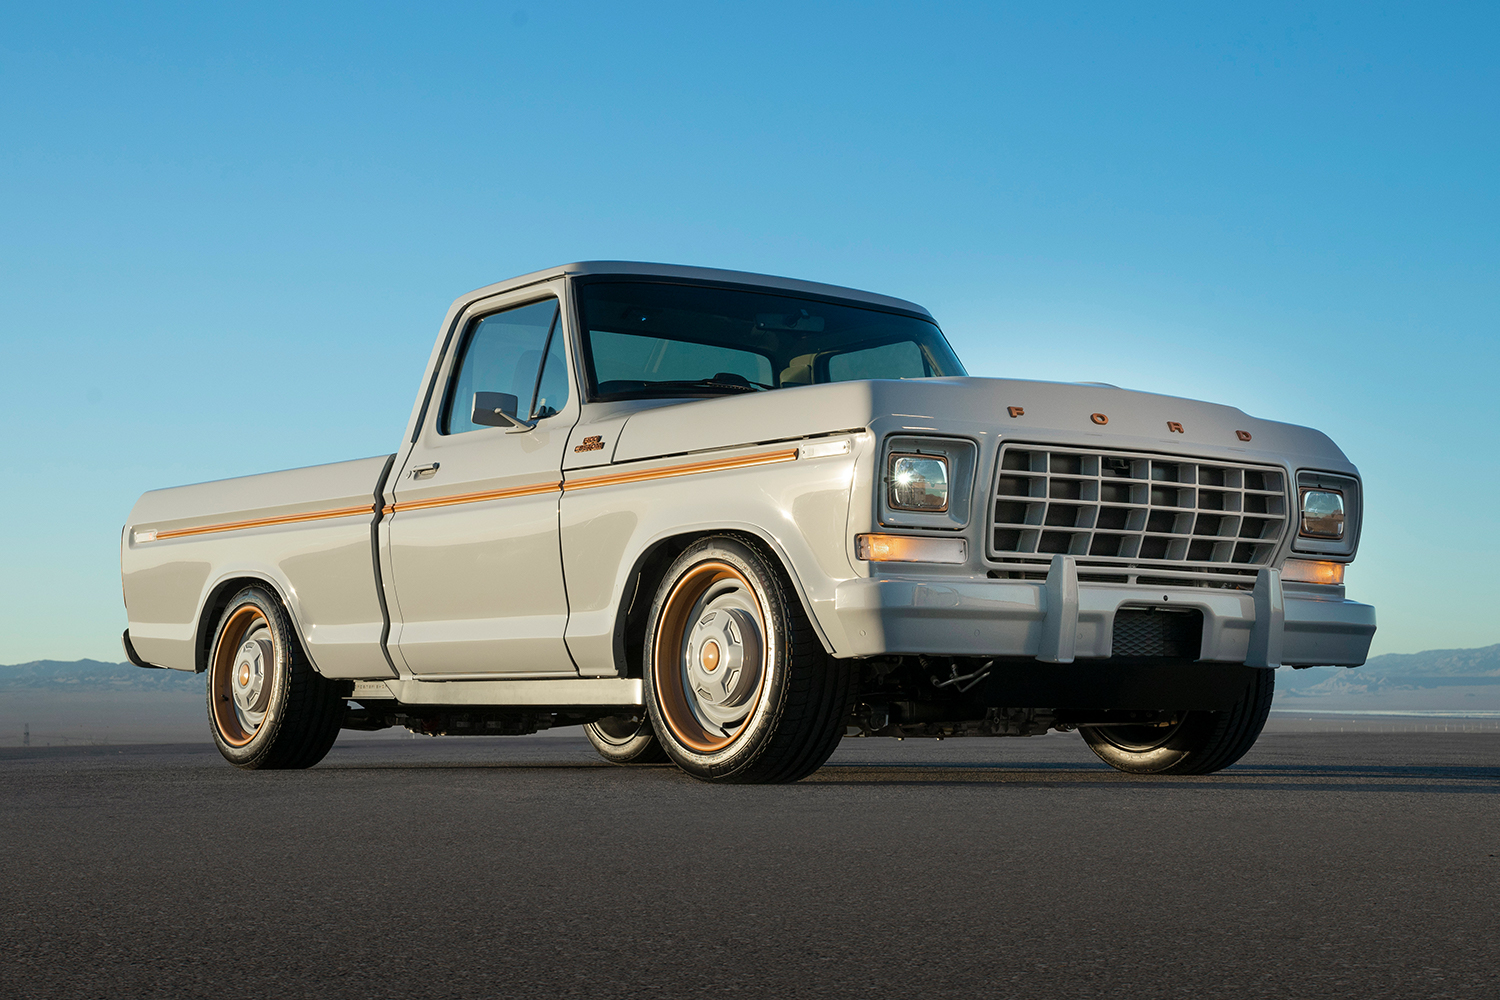 The Ford F-100 Eluminator, an electric concept vehicle based on a pickup from 1978, shown at SEMA 2021